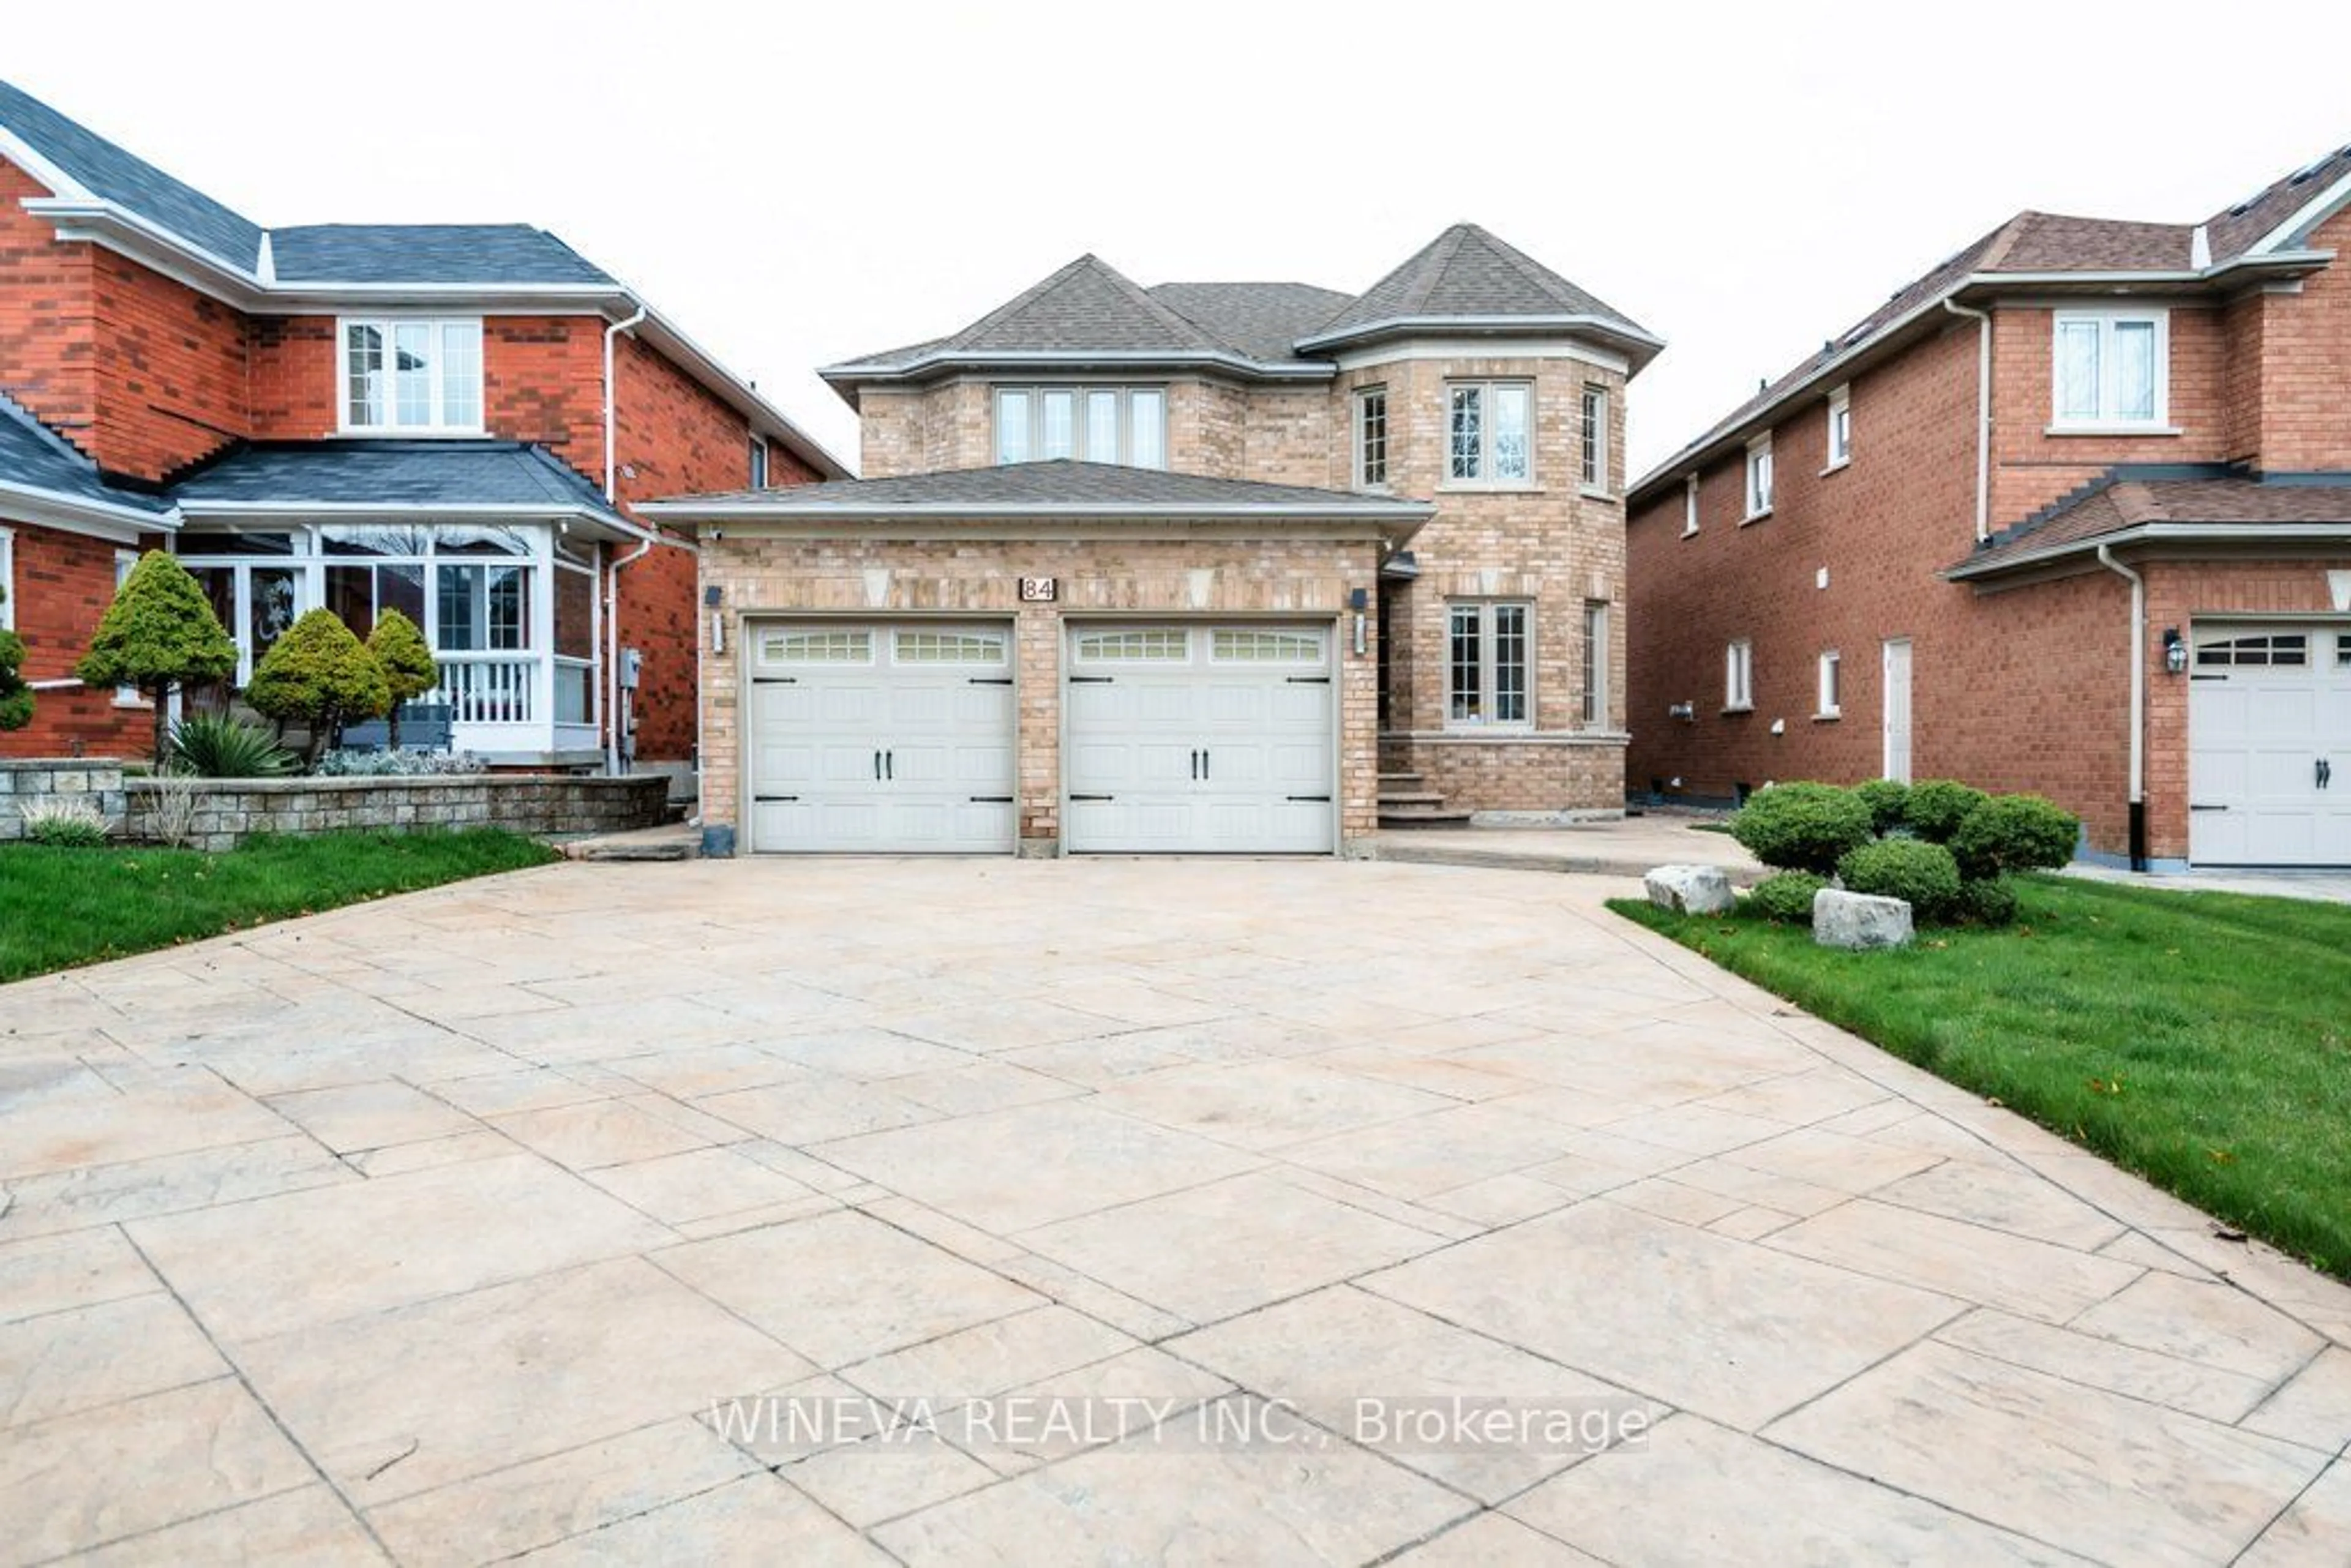 Home with brick exterior material for 84 Song Bird Dr, Markham Ontario L3S 3T8